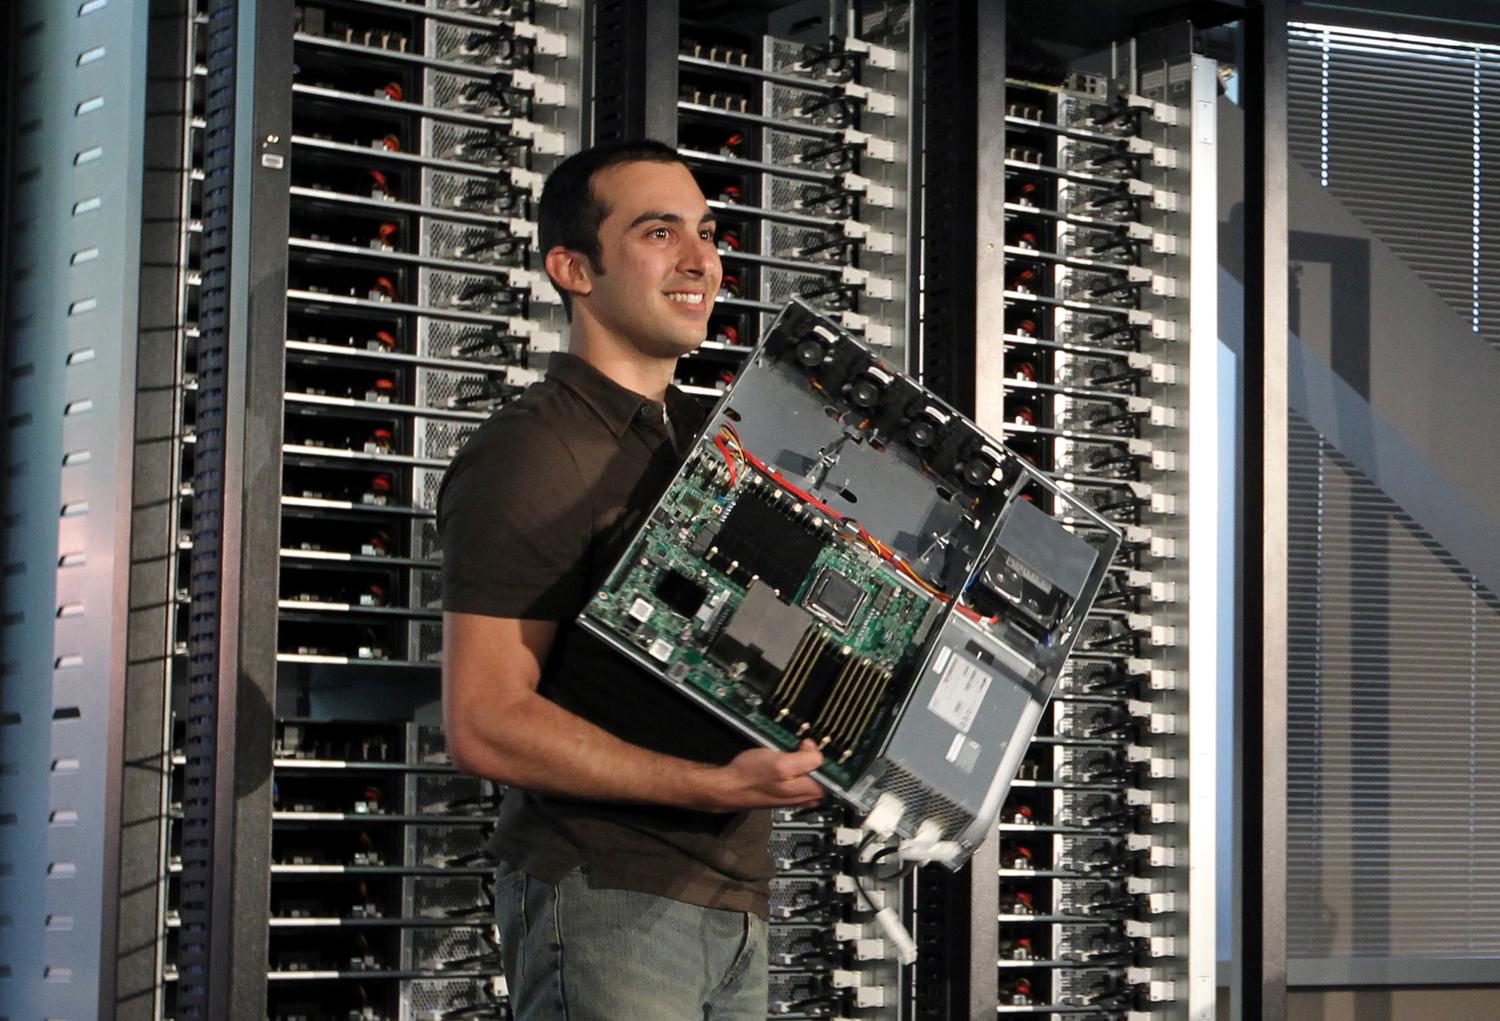 Amir Michael holds an "open compute program" server from the racks at Facebook's headquarters in Palo Alto